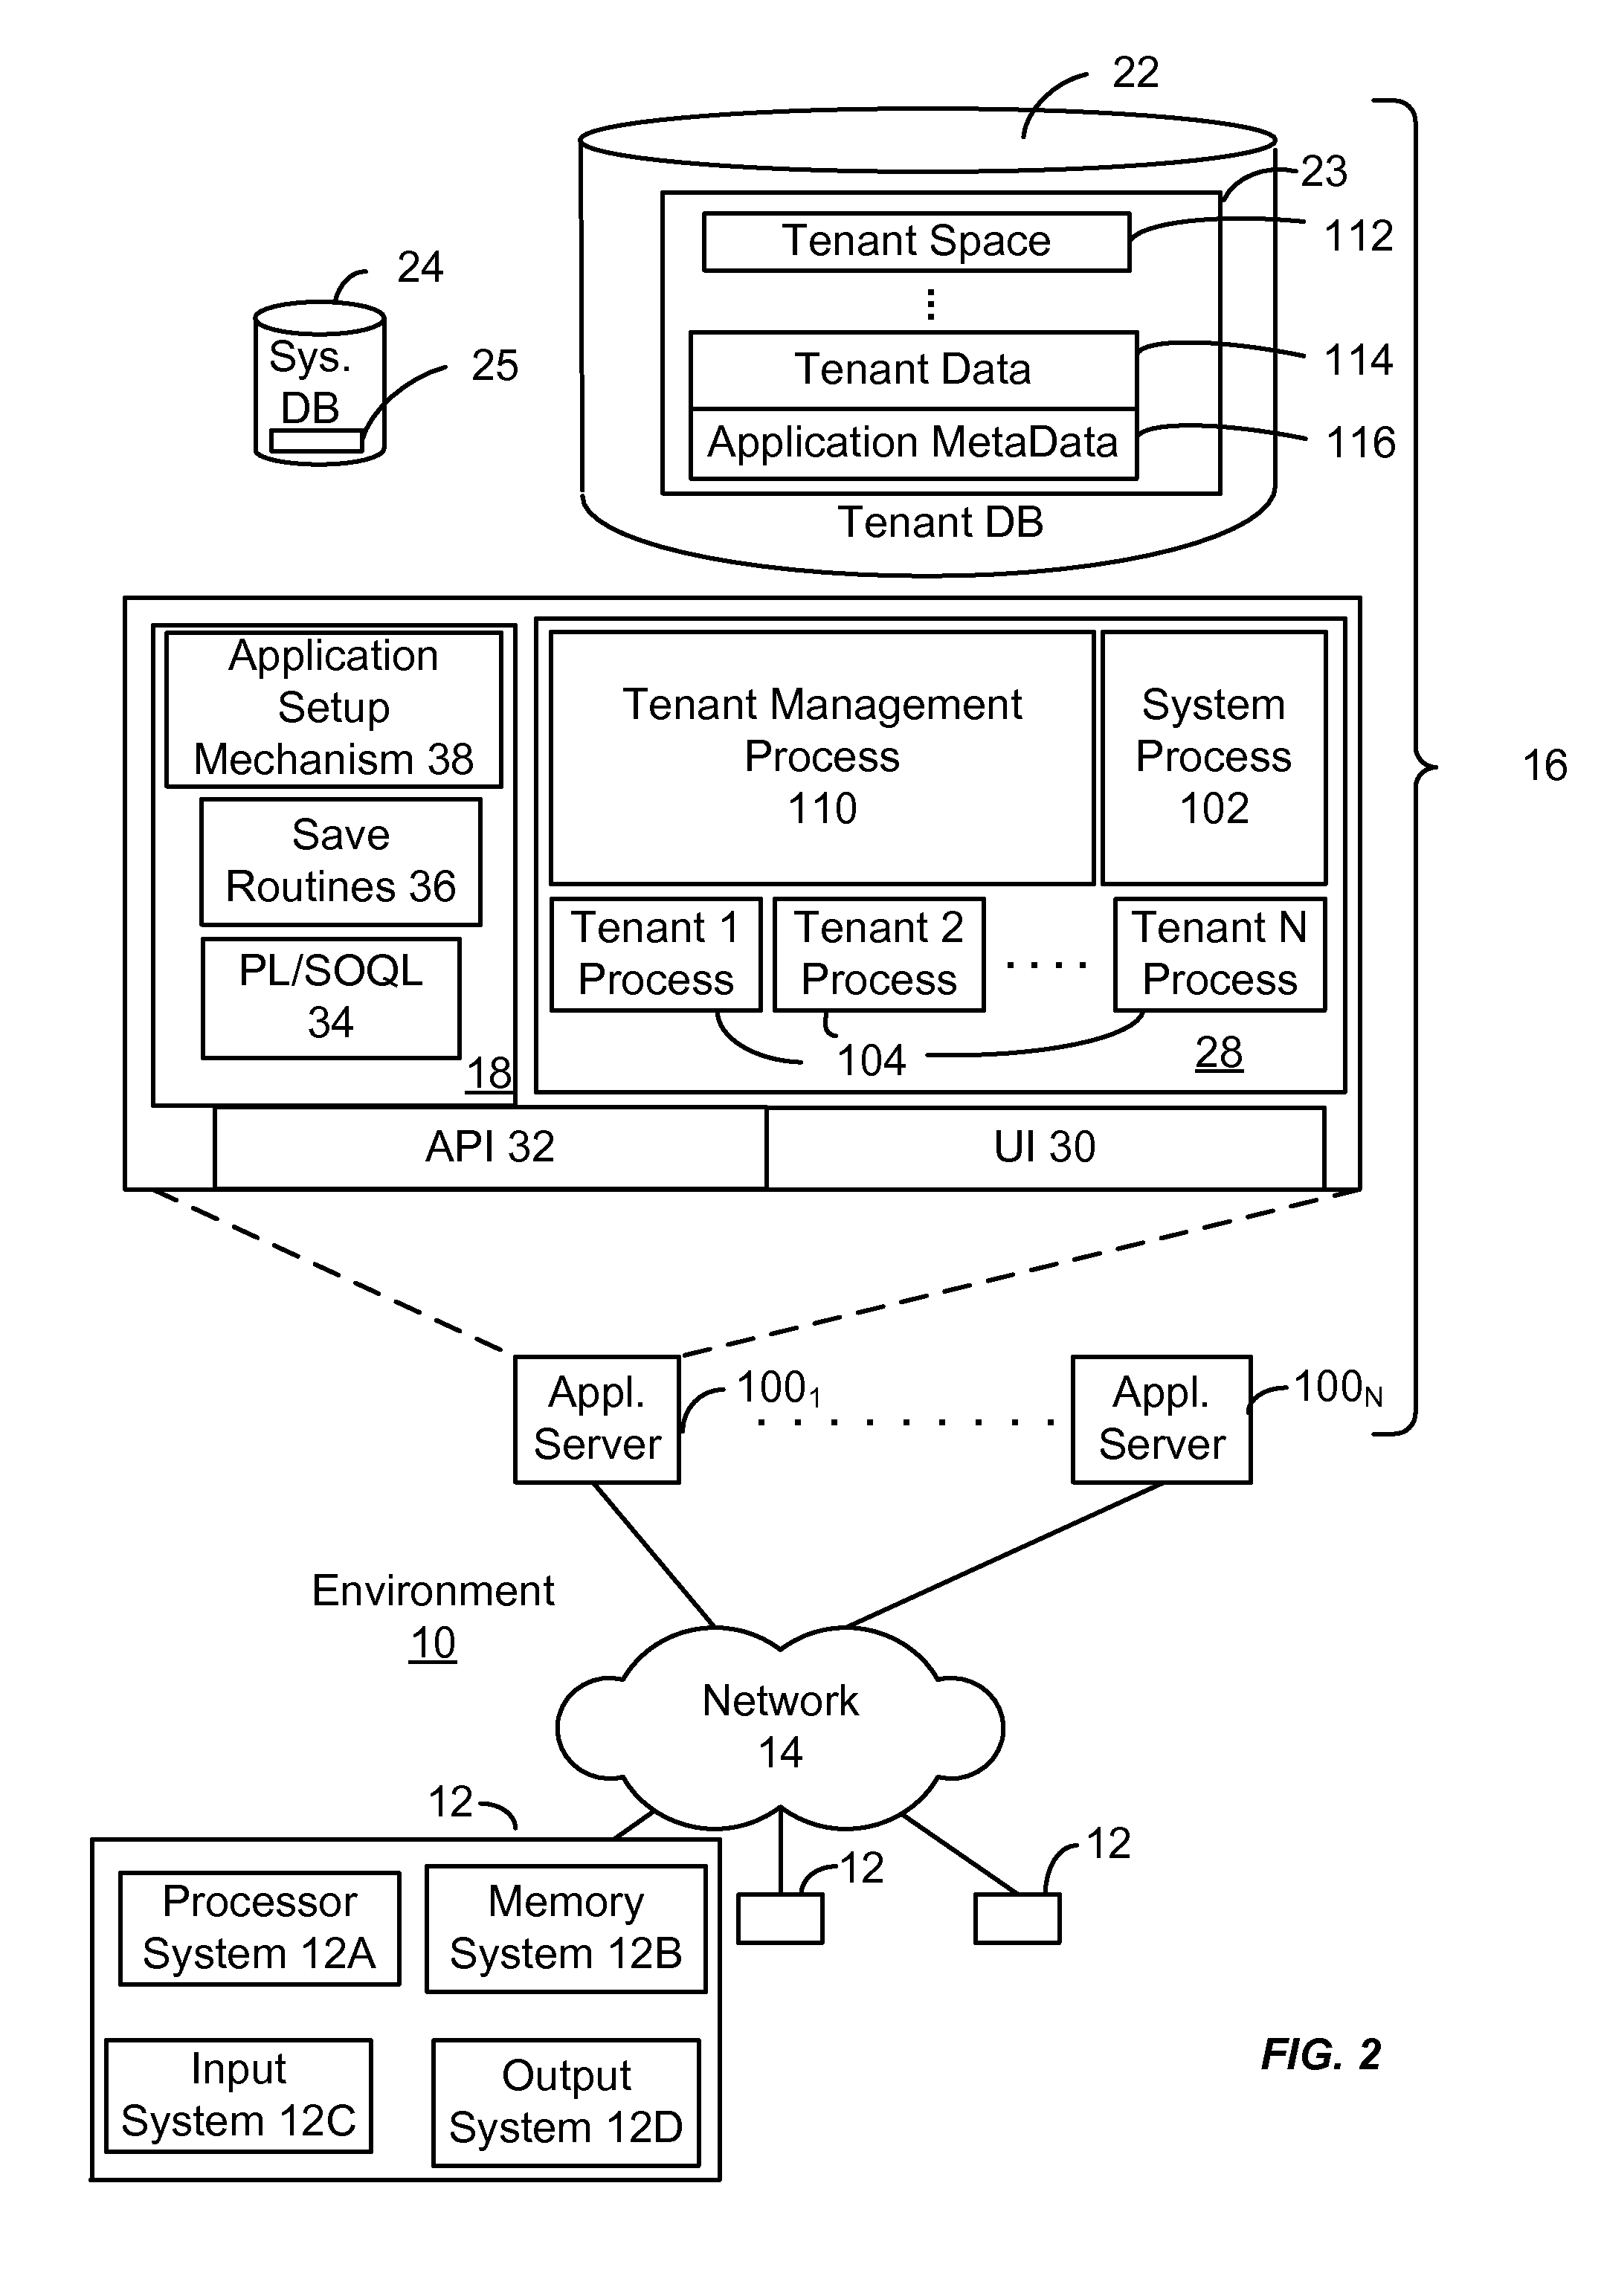 Method and system for customizing a user interface to an on-demand database service